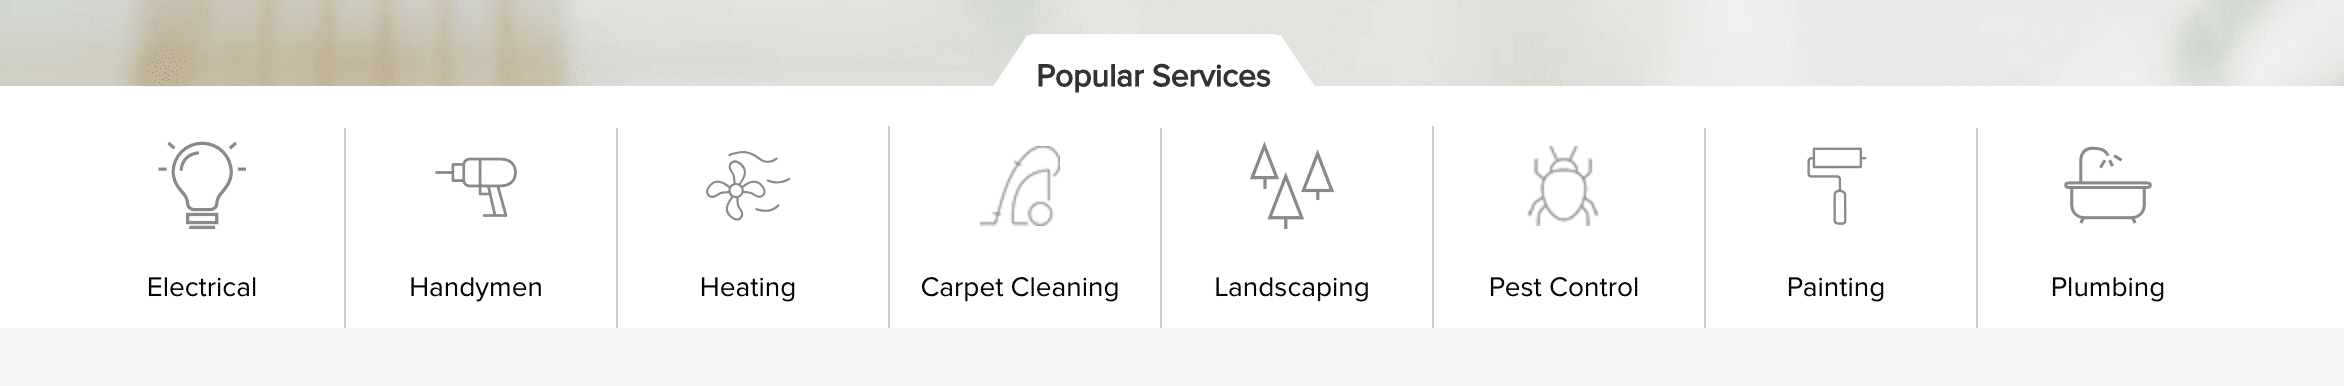 Angie's List Popular Services